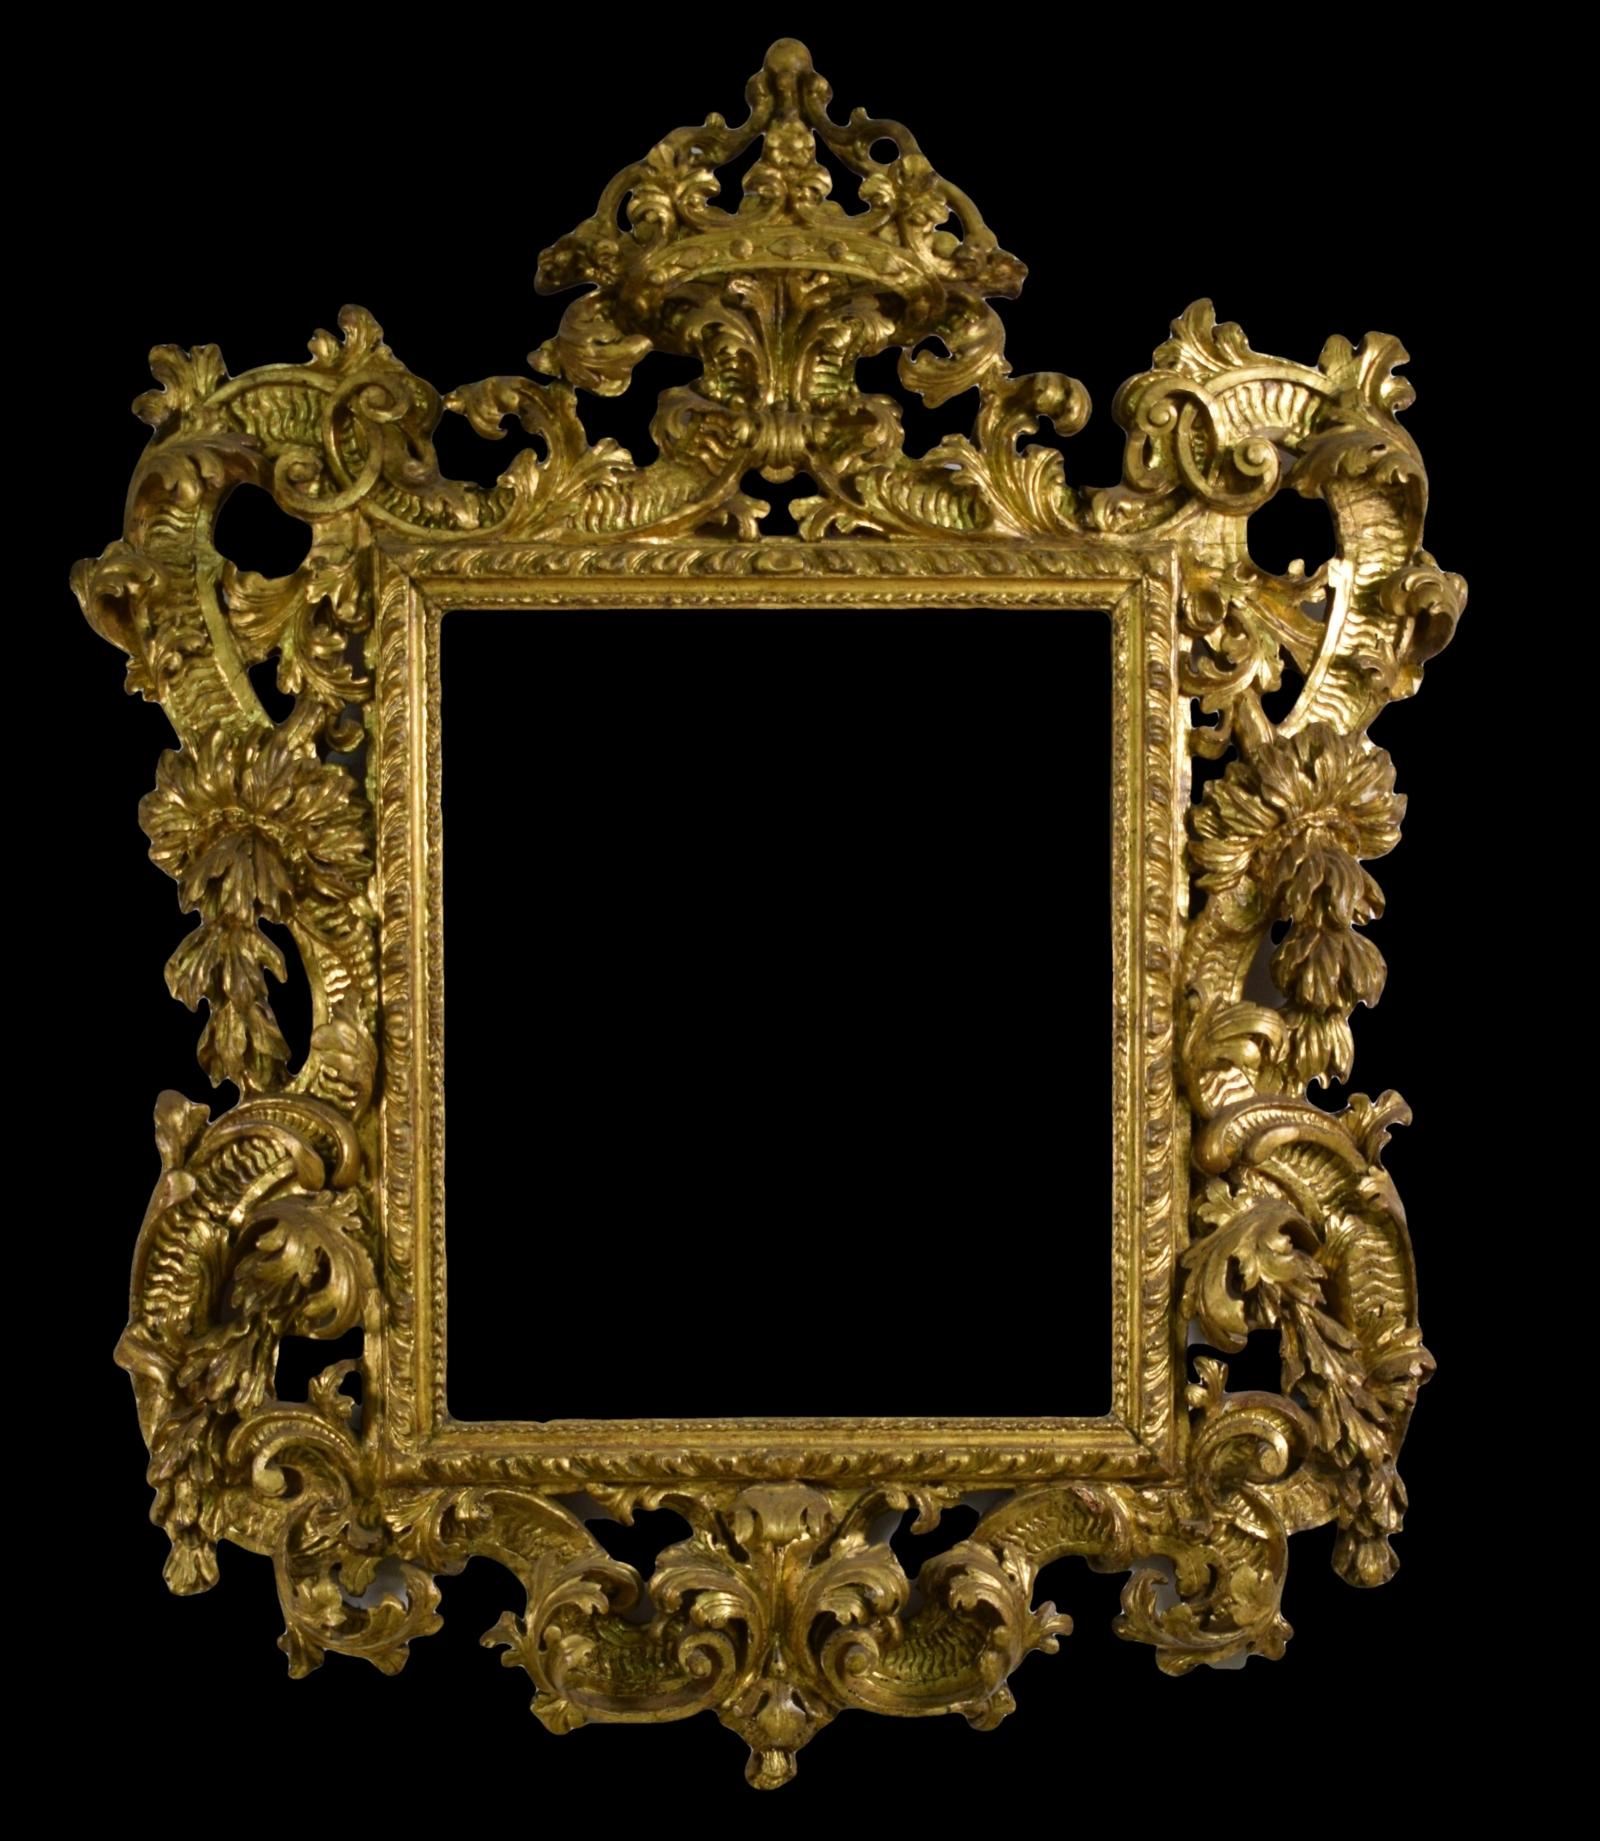 18th century, Italian baroque giltwood mirror
This fine Baroque mirror was made in Venice (Italy) at the beginning of the 18th century, Louis XV Era.
The rectangular mirror is circumscribed by a golden wooden frame with three bands: an internal